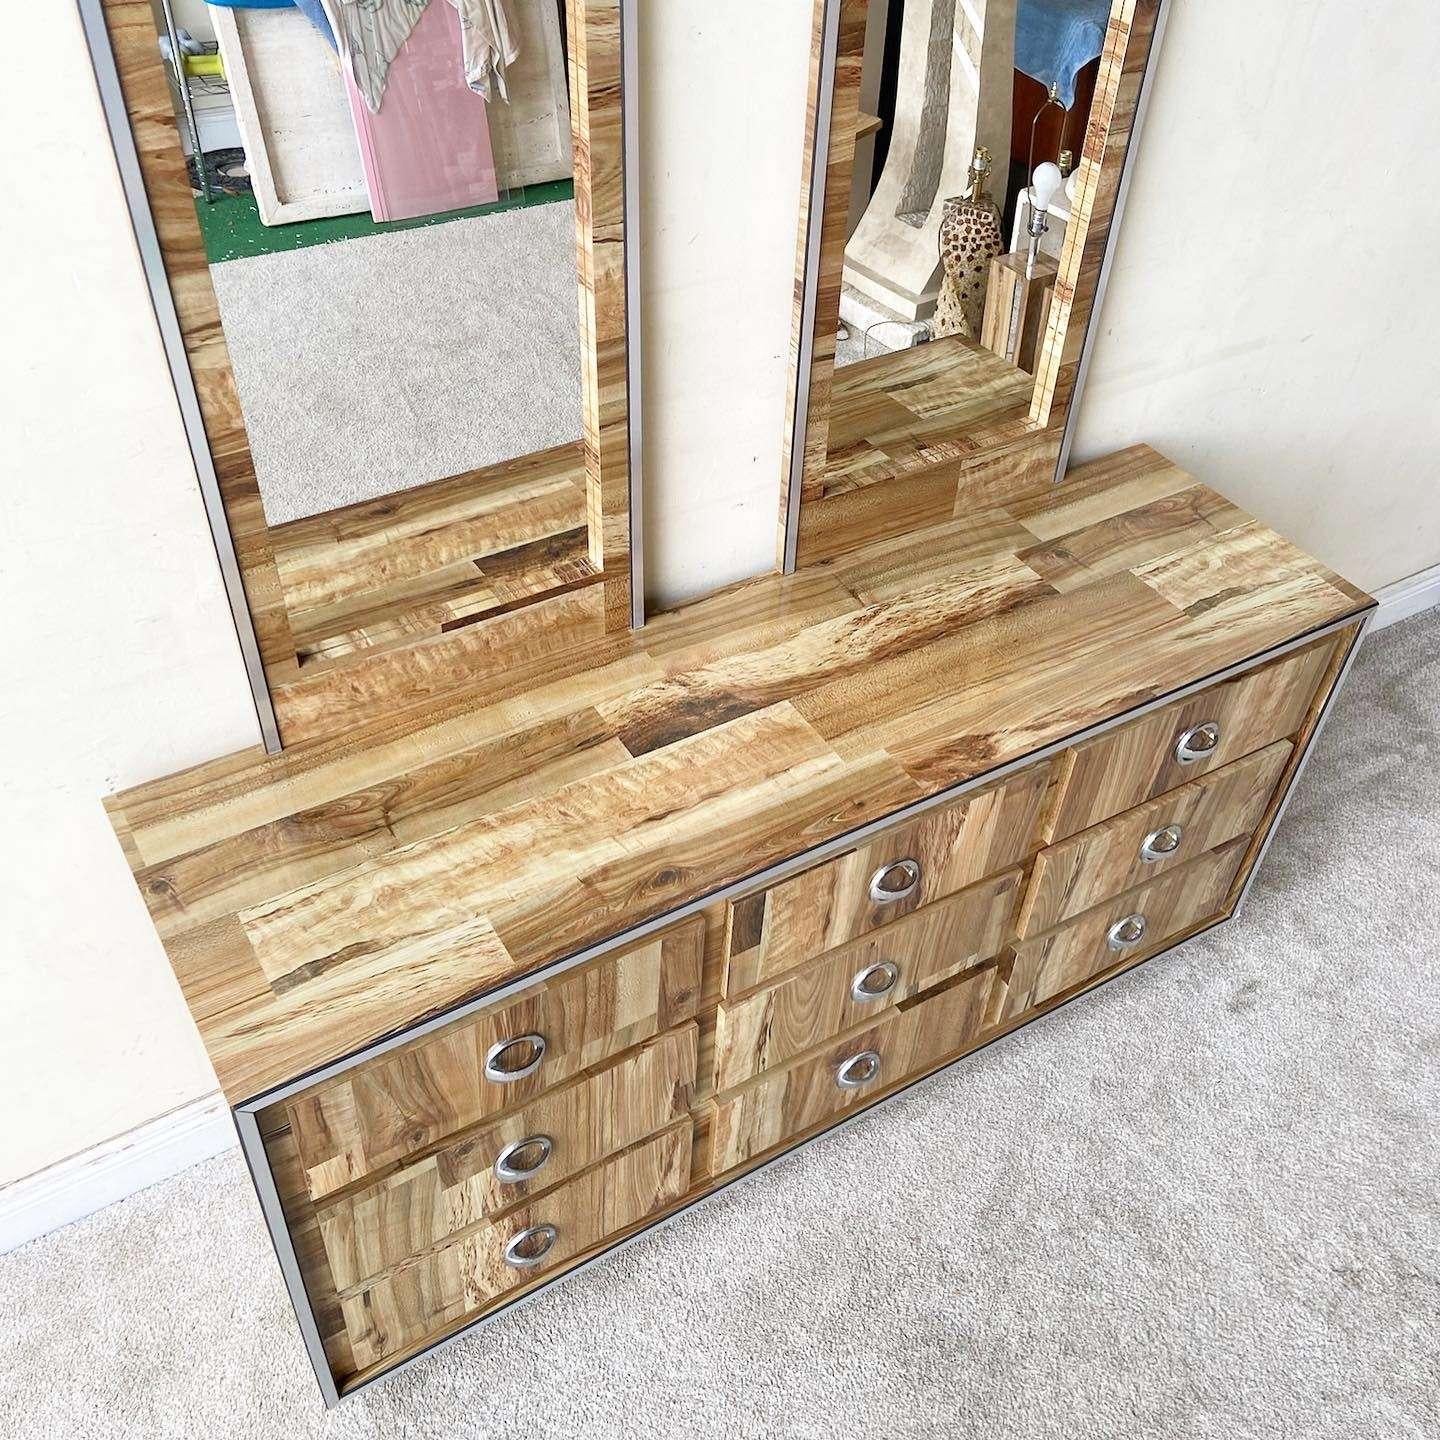 Postmodern Woodgrain Laminate Dresser With Mirrors - 3 Pieces In Good Condition For Sale In Delray Beach, FL